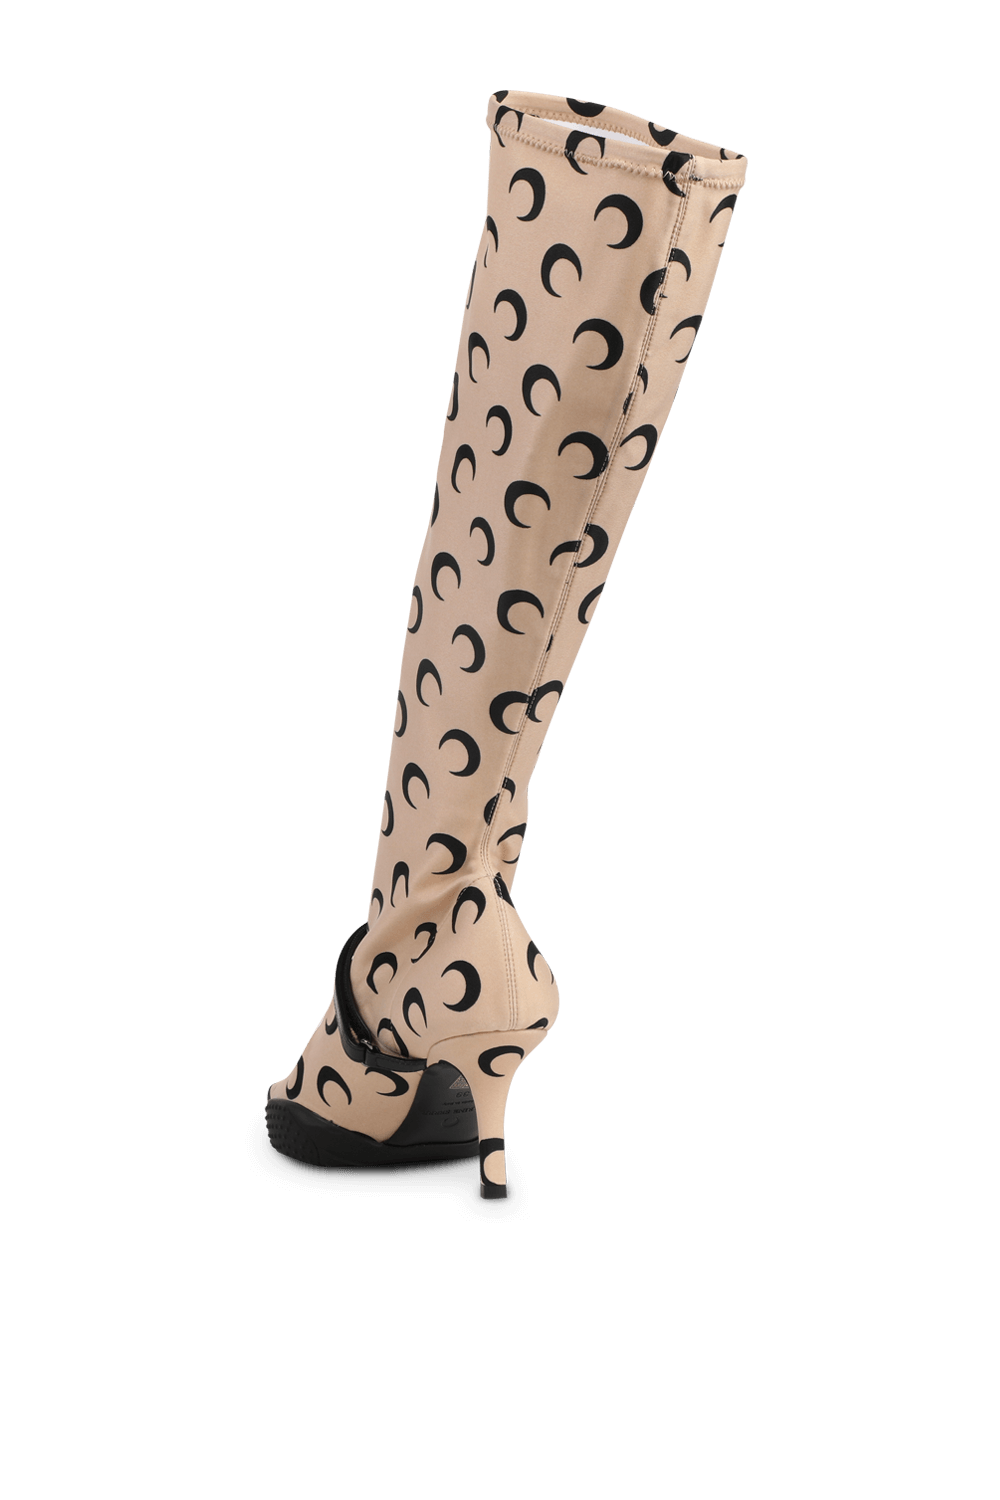 All Over Moon Print Second Skin Boots in Tan MARINE SERRE